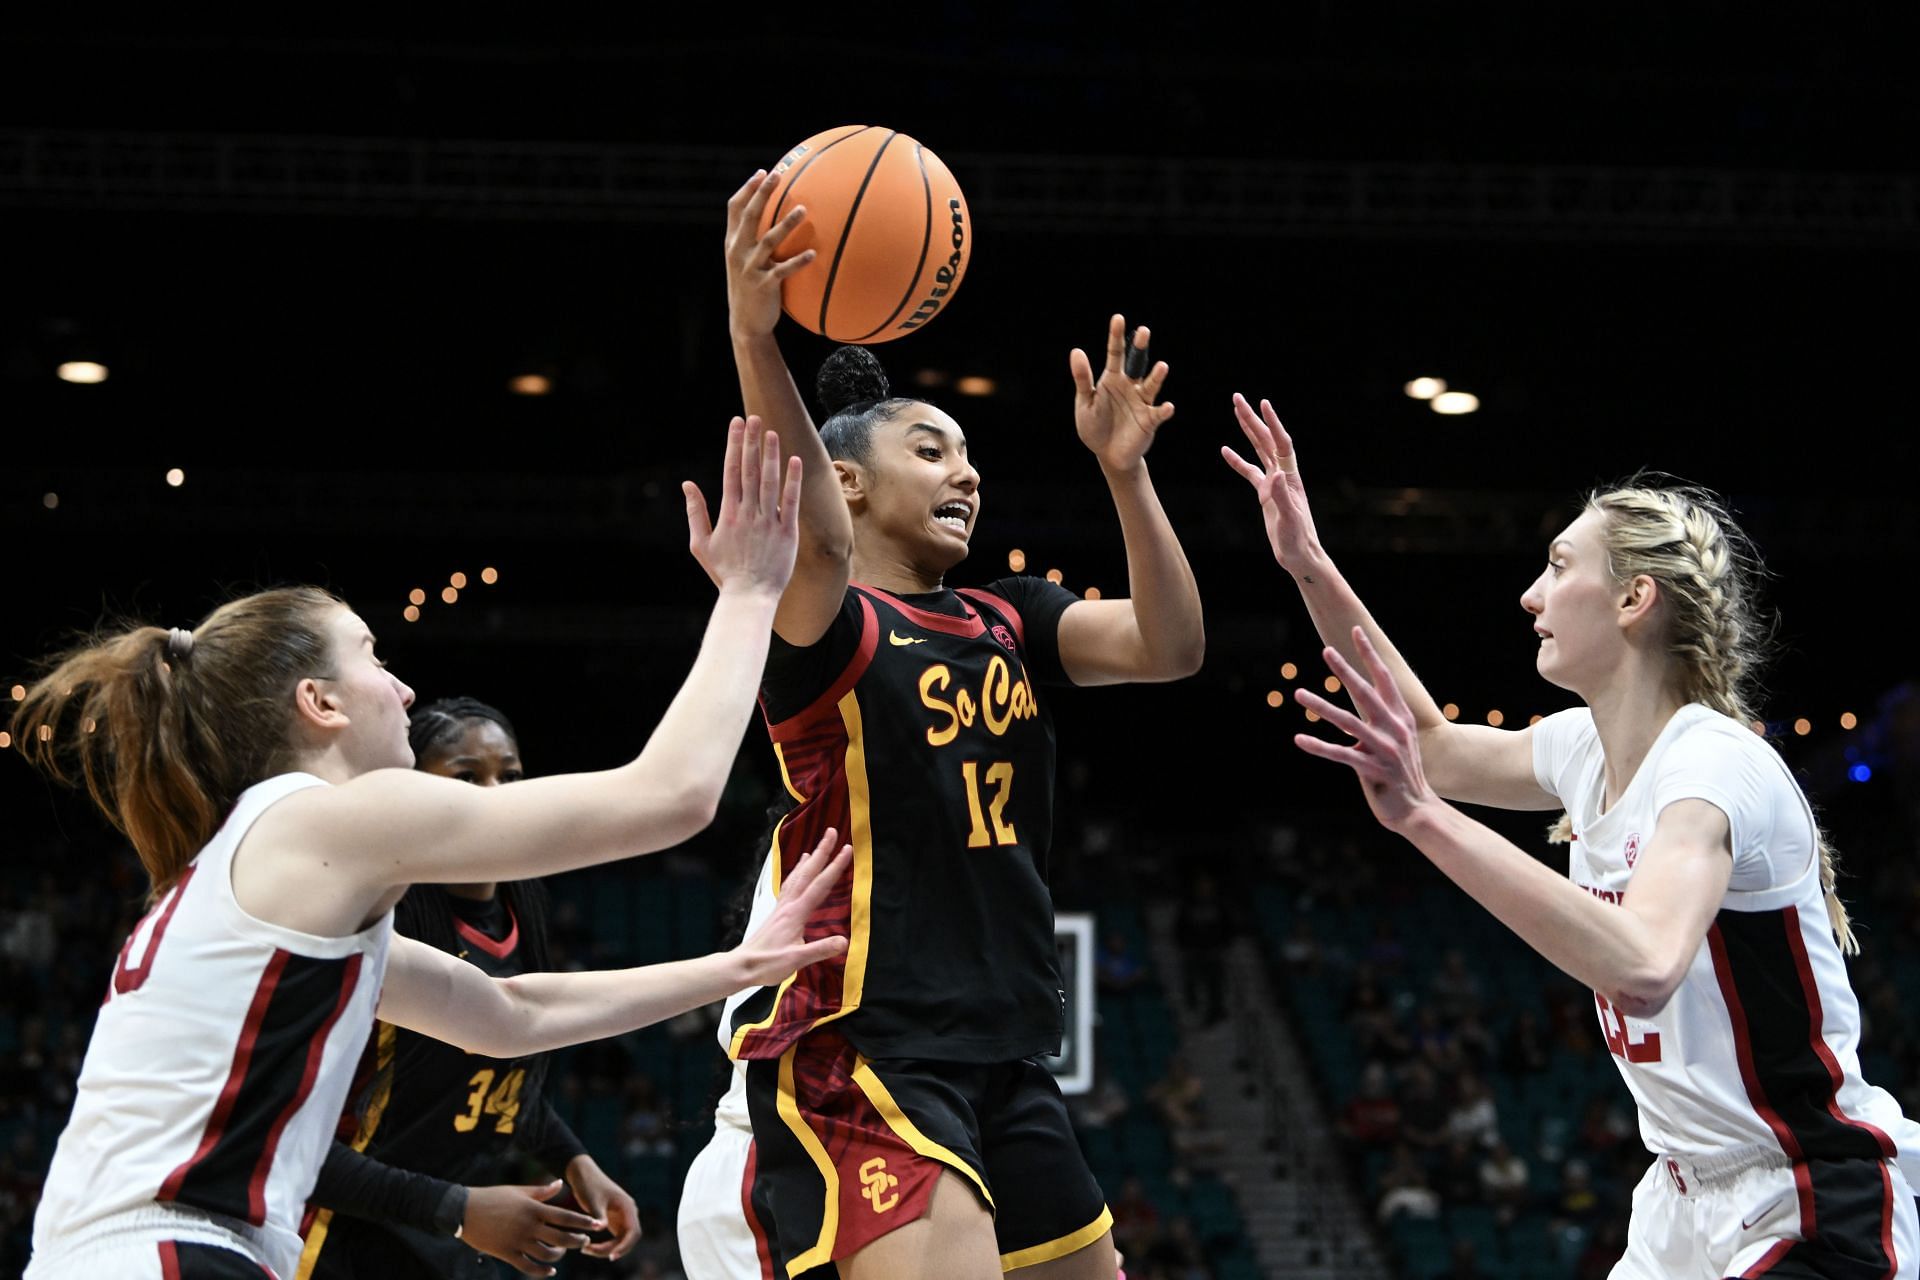 USC guard JuJu Watkins earned first-team All-American honors, making her one of only five freshmen ever to do so.